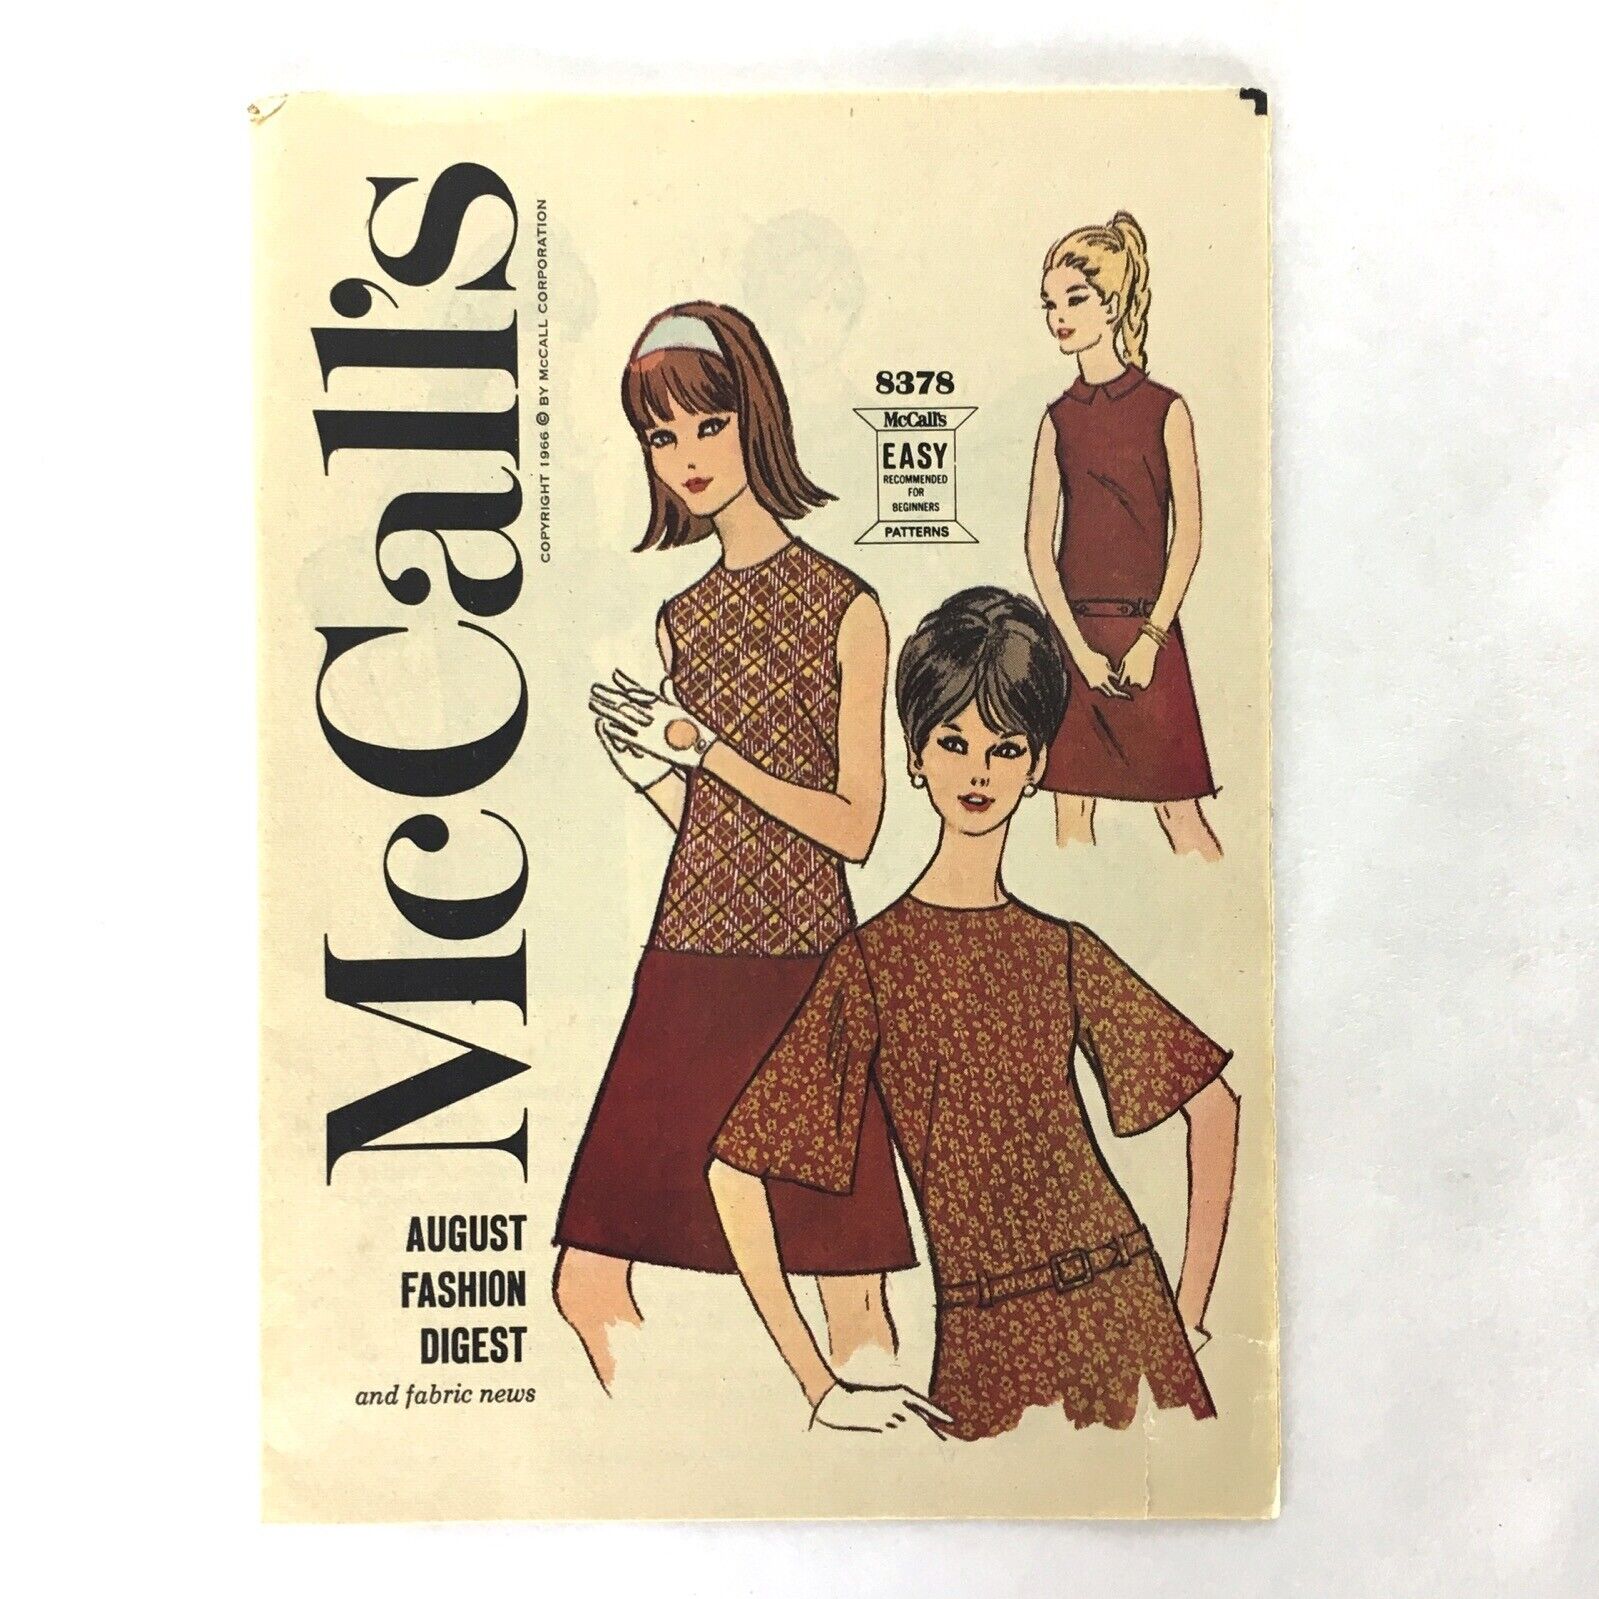 Vintage McCall\'s August Fashion Digest and Fabric News 1966 Polly’s Fabric Shop